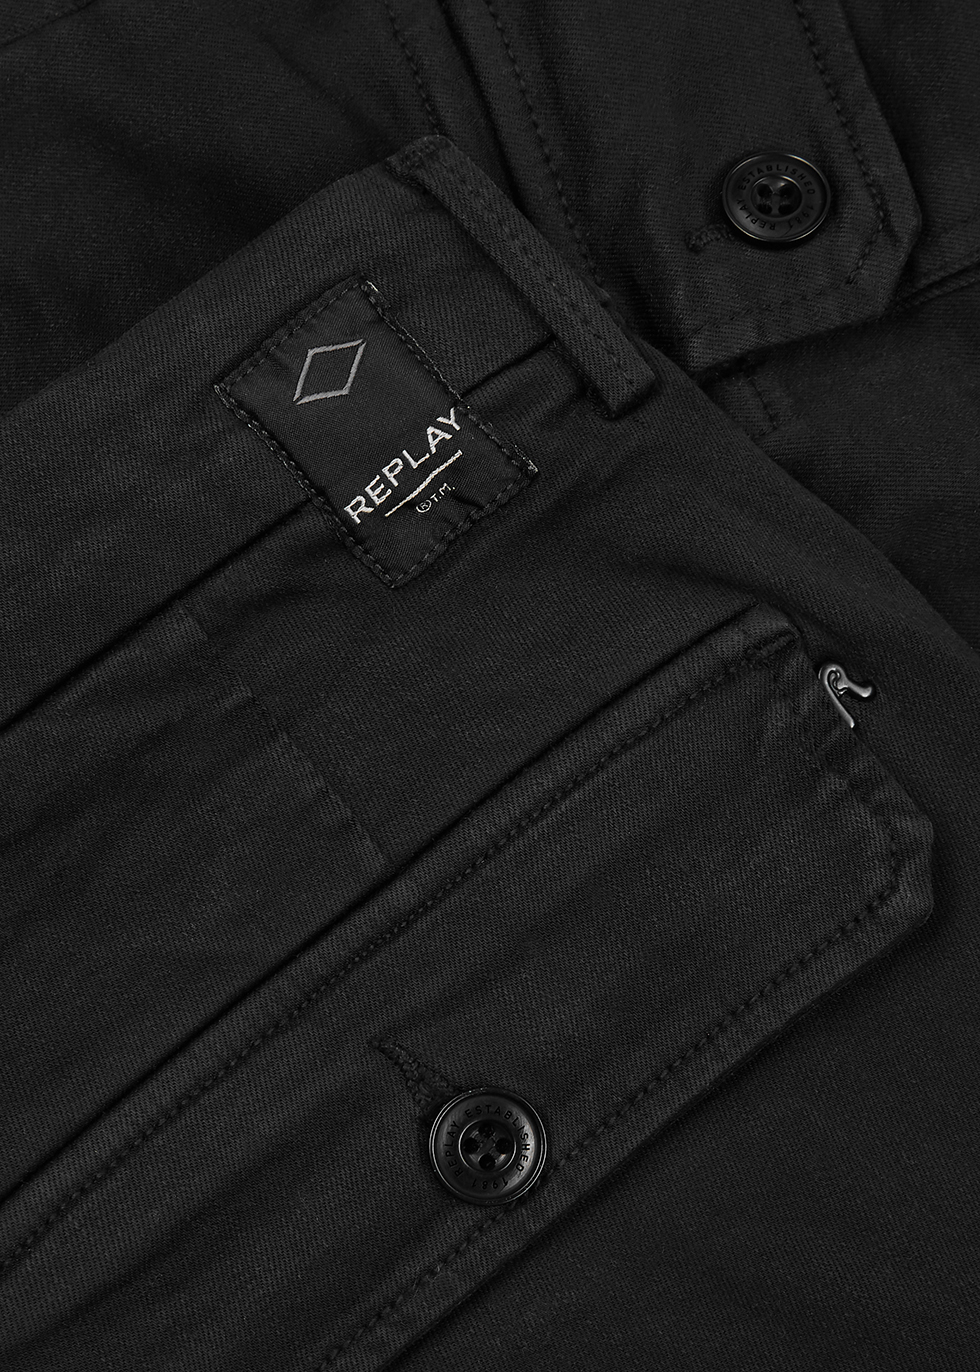 Replay M9531 Cargo Pant  HotelShops